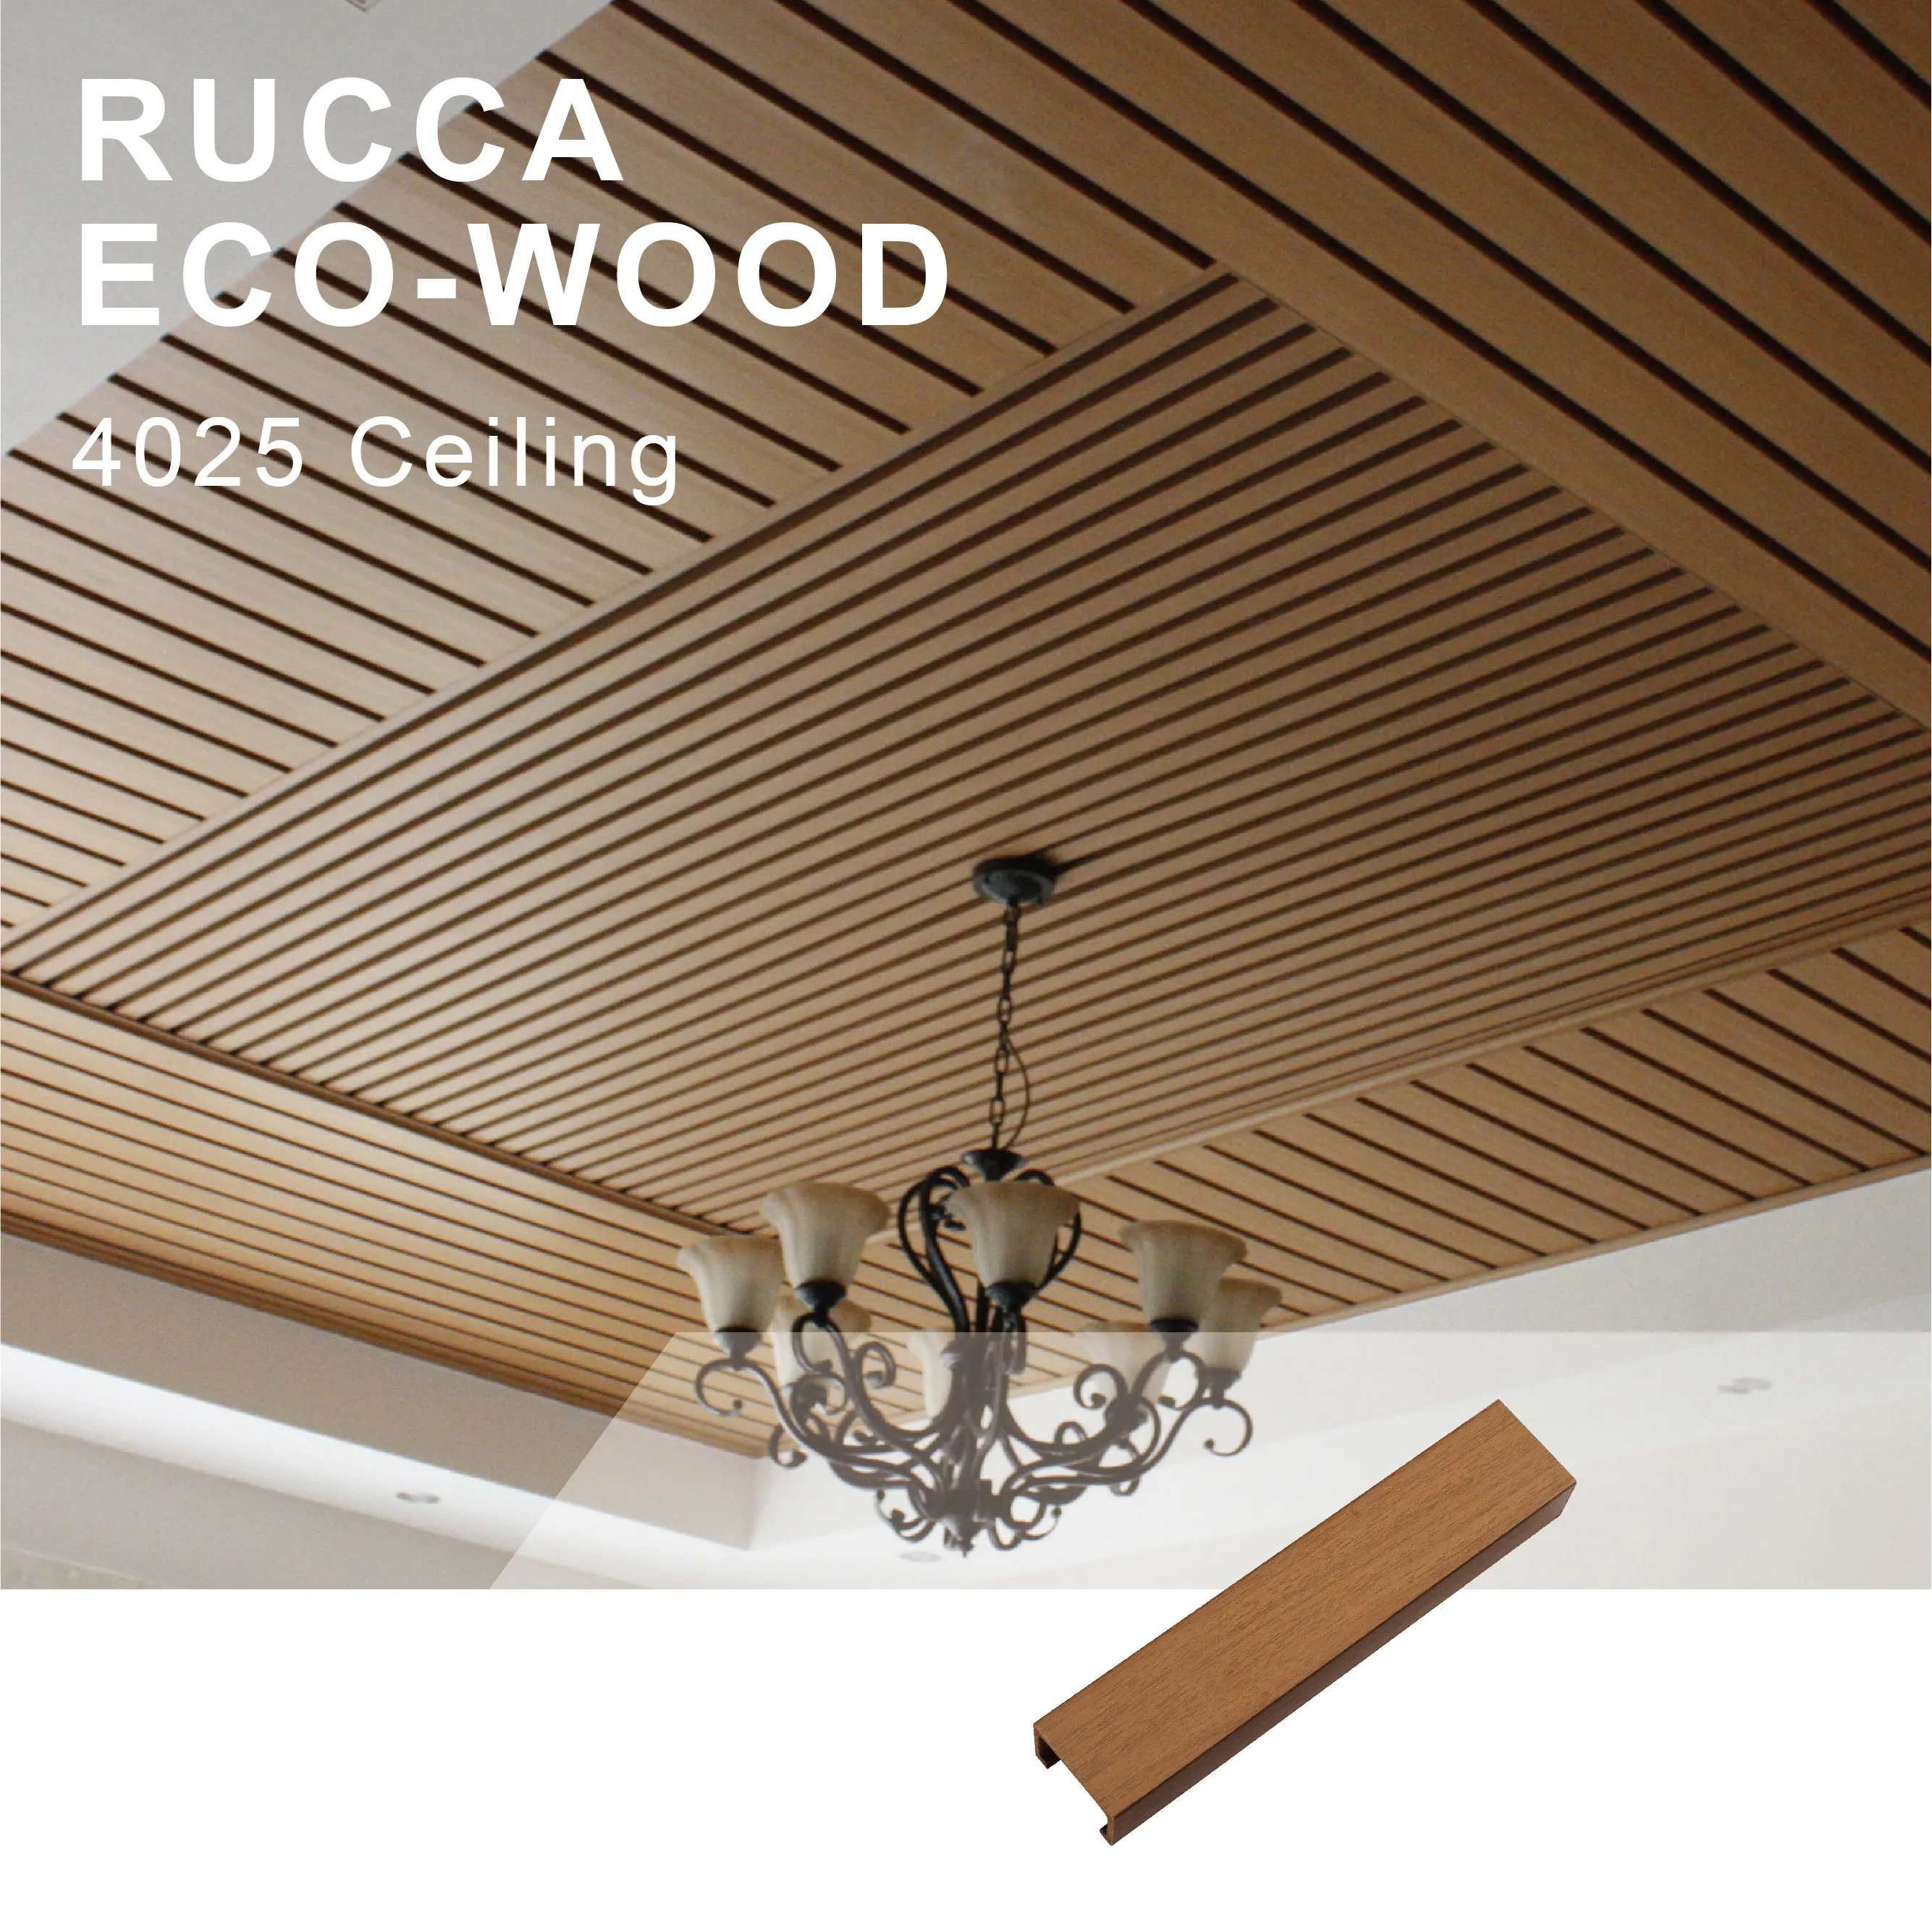 China Wood Paneling Ceilings China Wood Paneling Ceilings